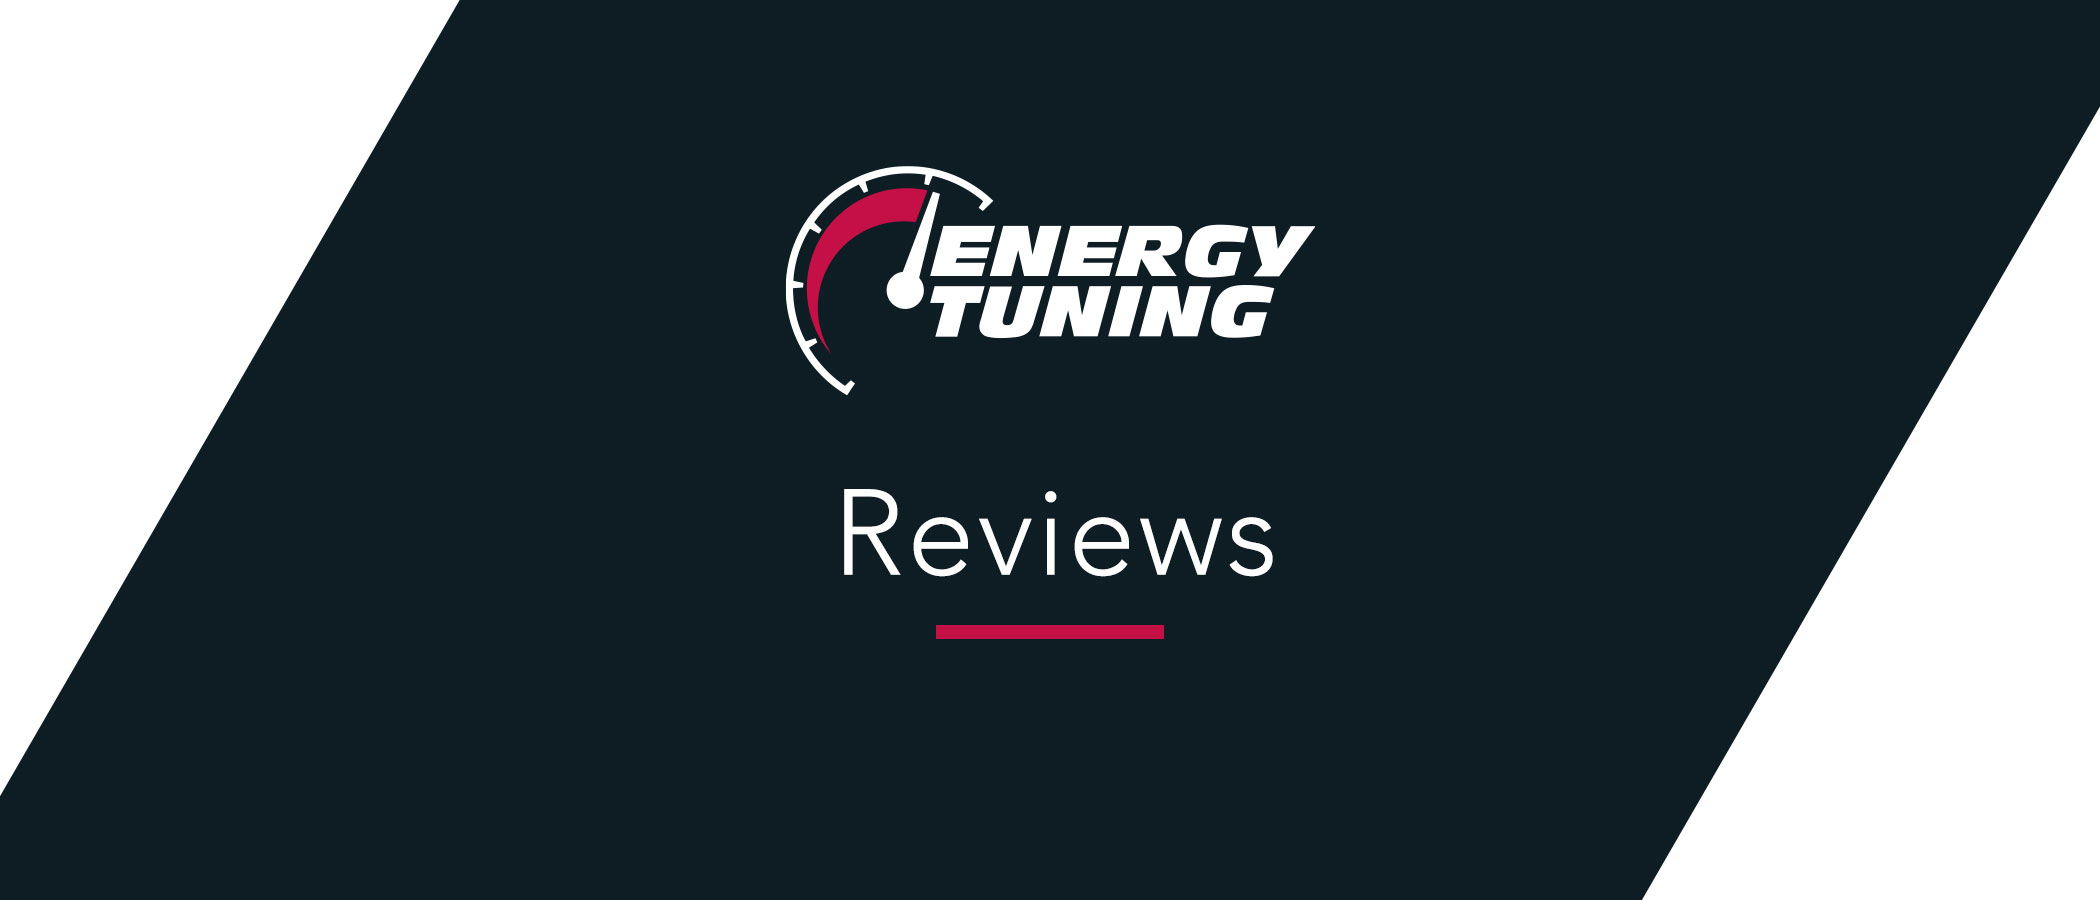 Energy Tuning Reviews